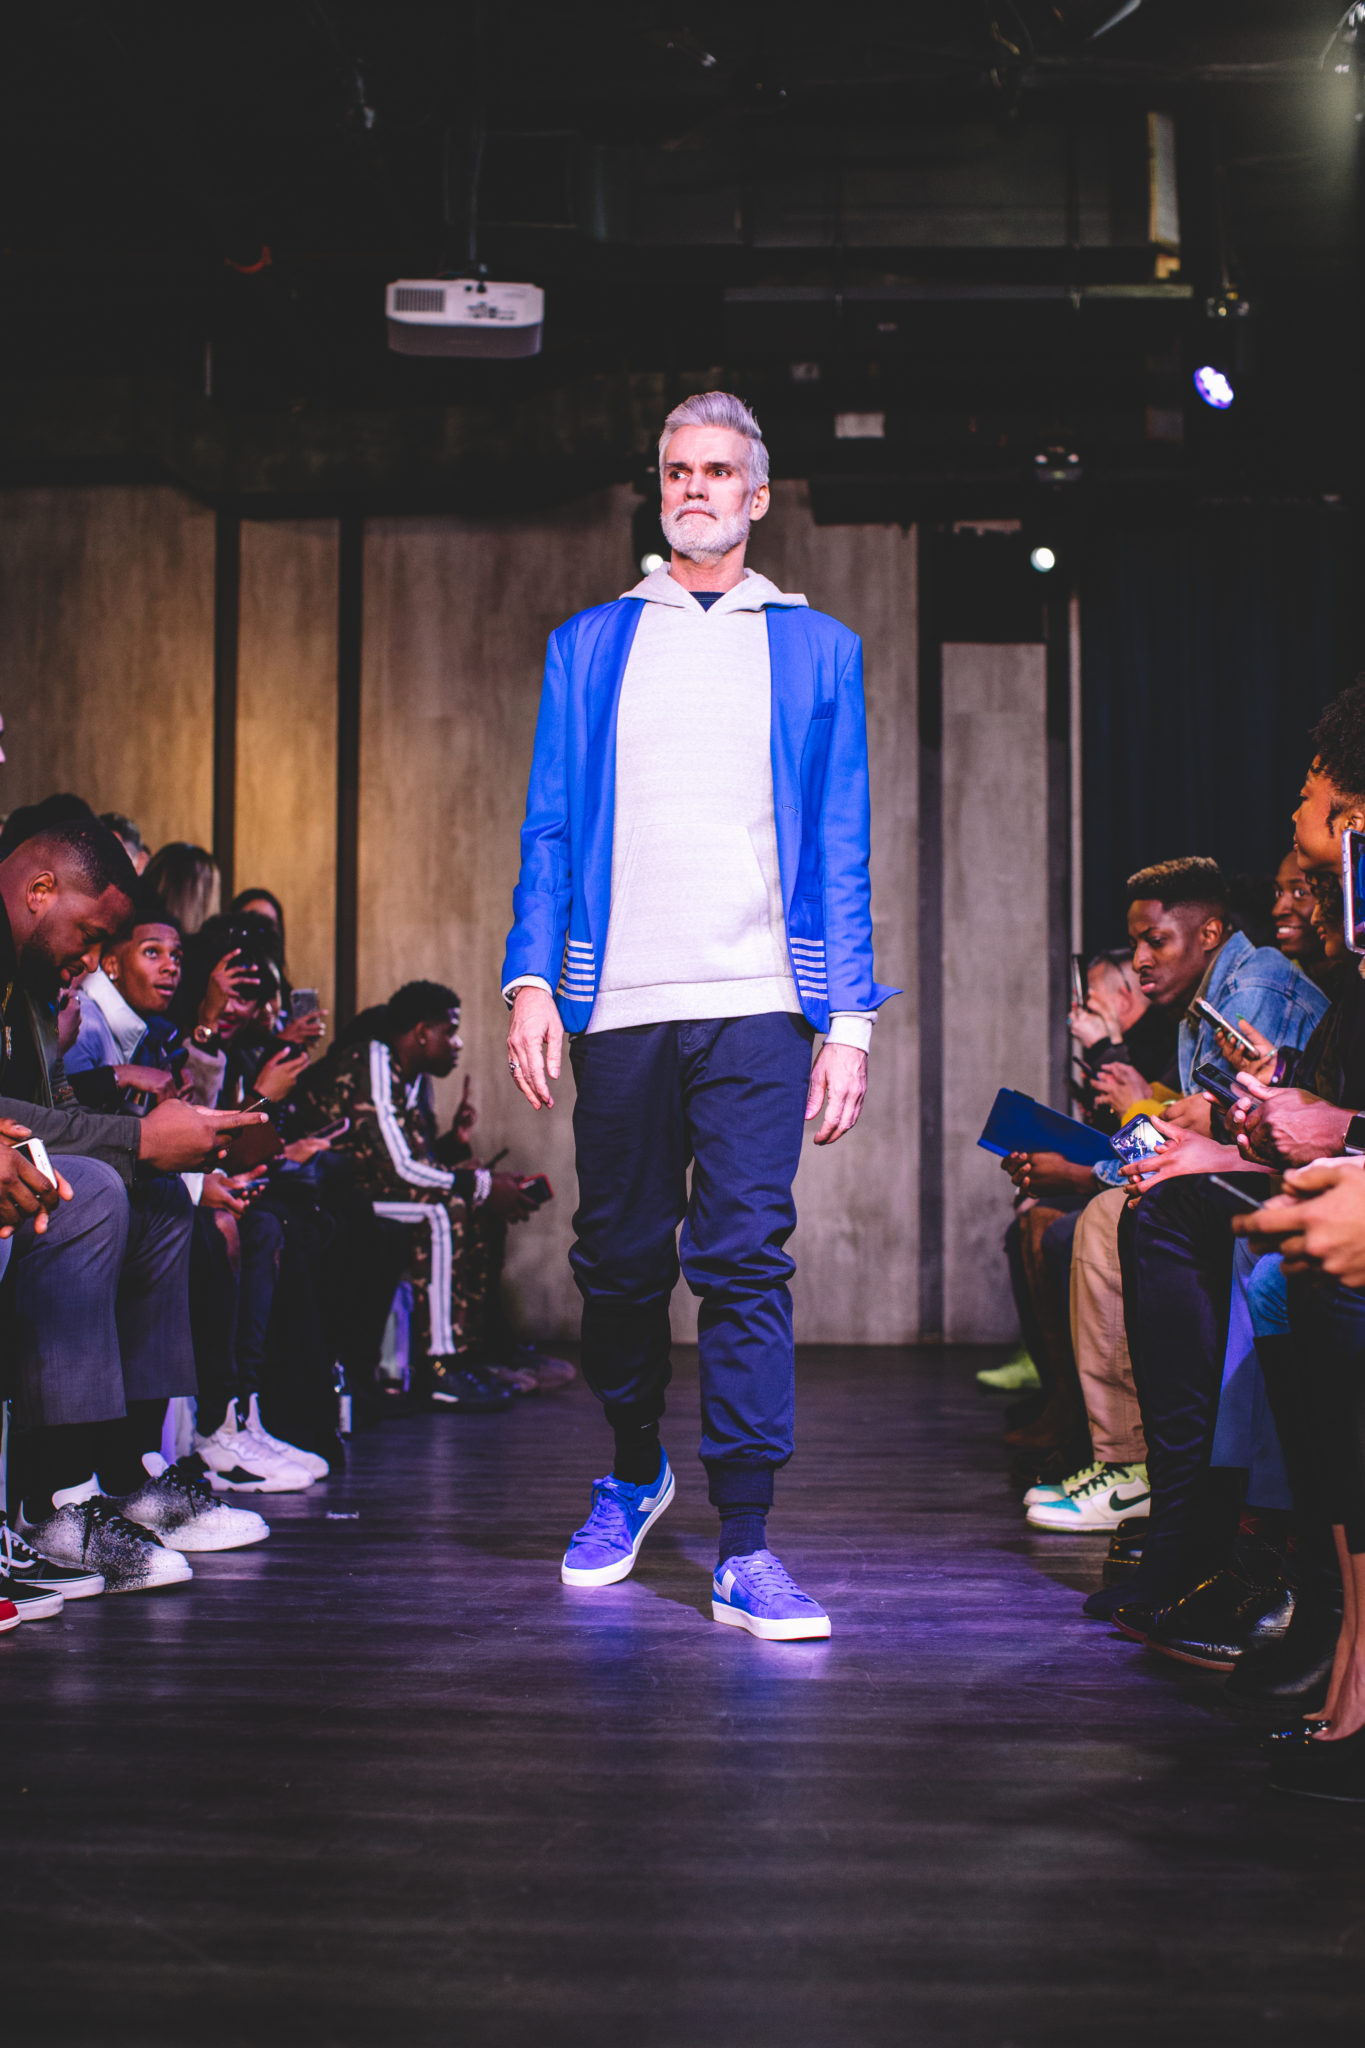 Grungy Gentleman to Debut Knicks-Themed Clothes at NY Fashion Week